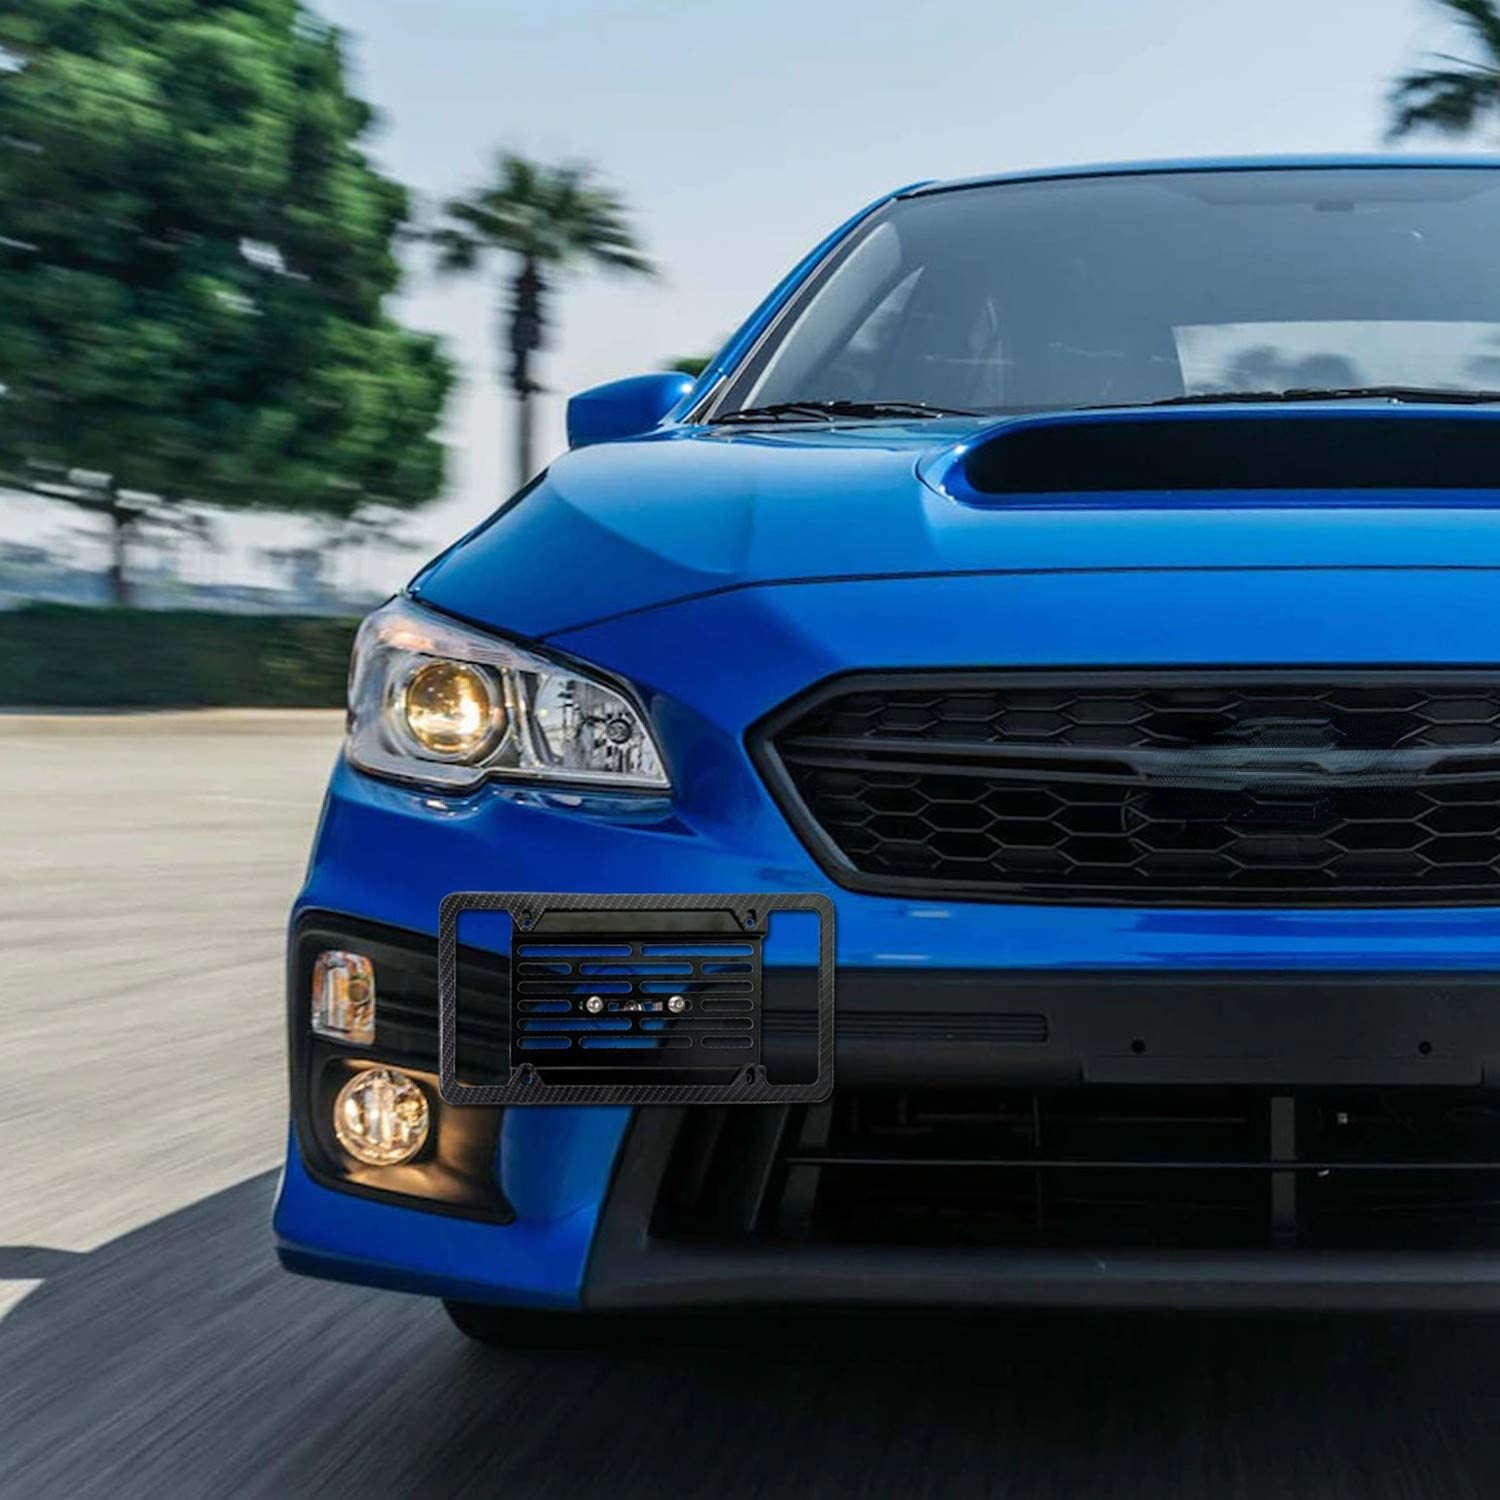 Upgrade Your Wrx Sti Or Scion Fr S With This Front Bumper Tow Hook